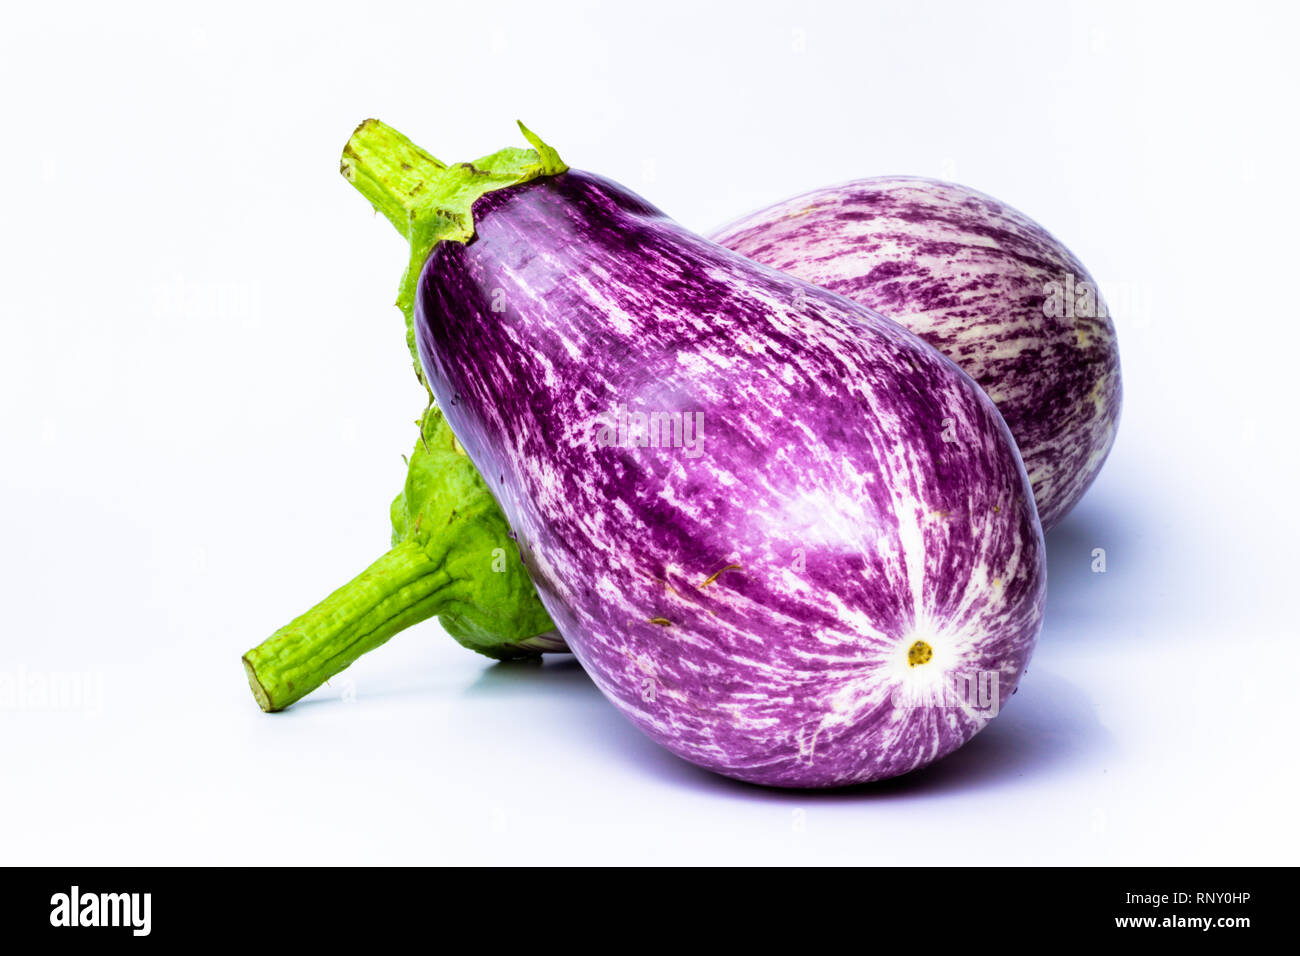 Two white eggplants isolated on white background. Horizontal view Vegetable violet and white with the green cape. Vegan organic food. Stock Photo